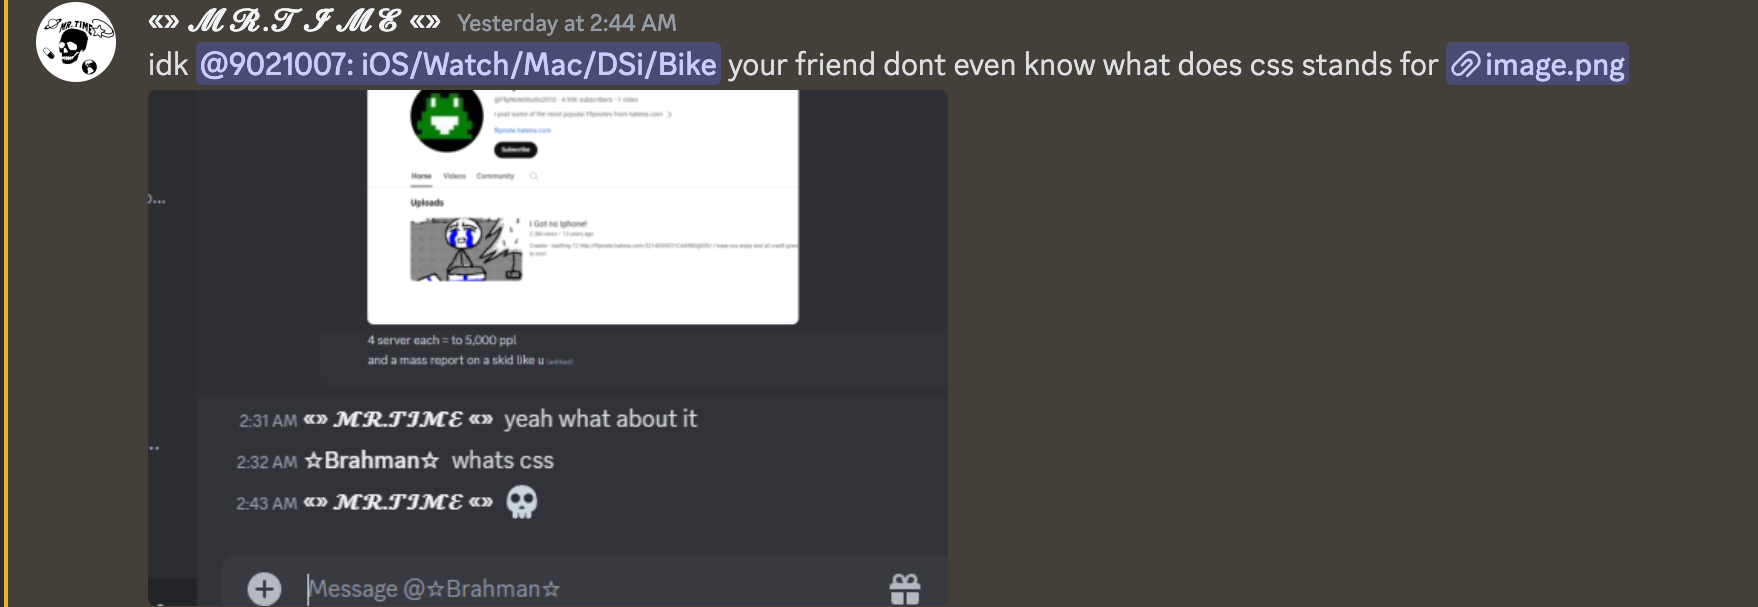 mr.time says "idk 9201007 your friend dont even know what css stands for", attached image which is screenshot of DM with person saying "whats CSS"